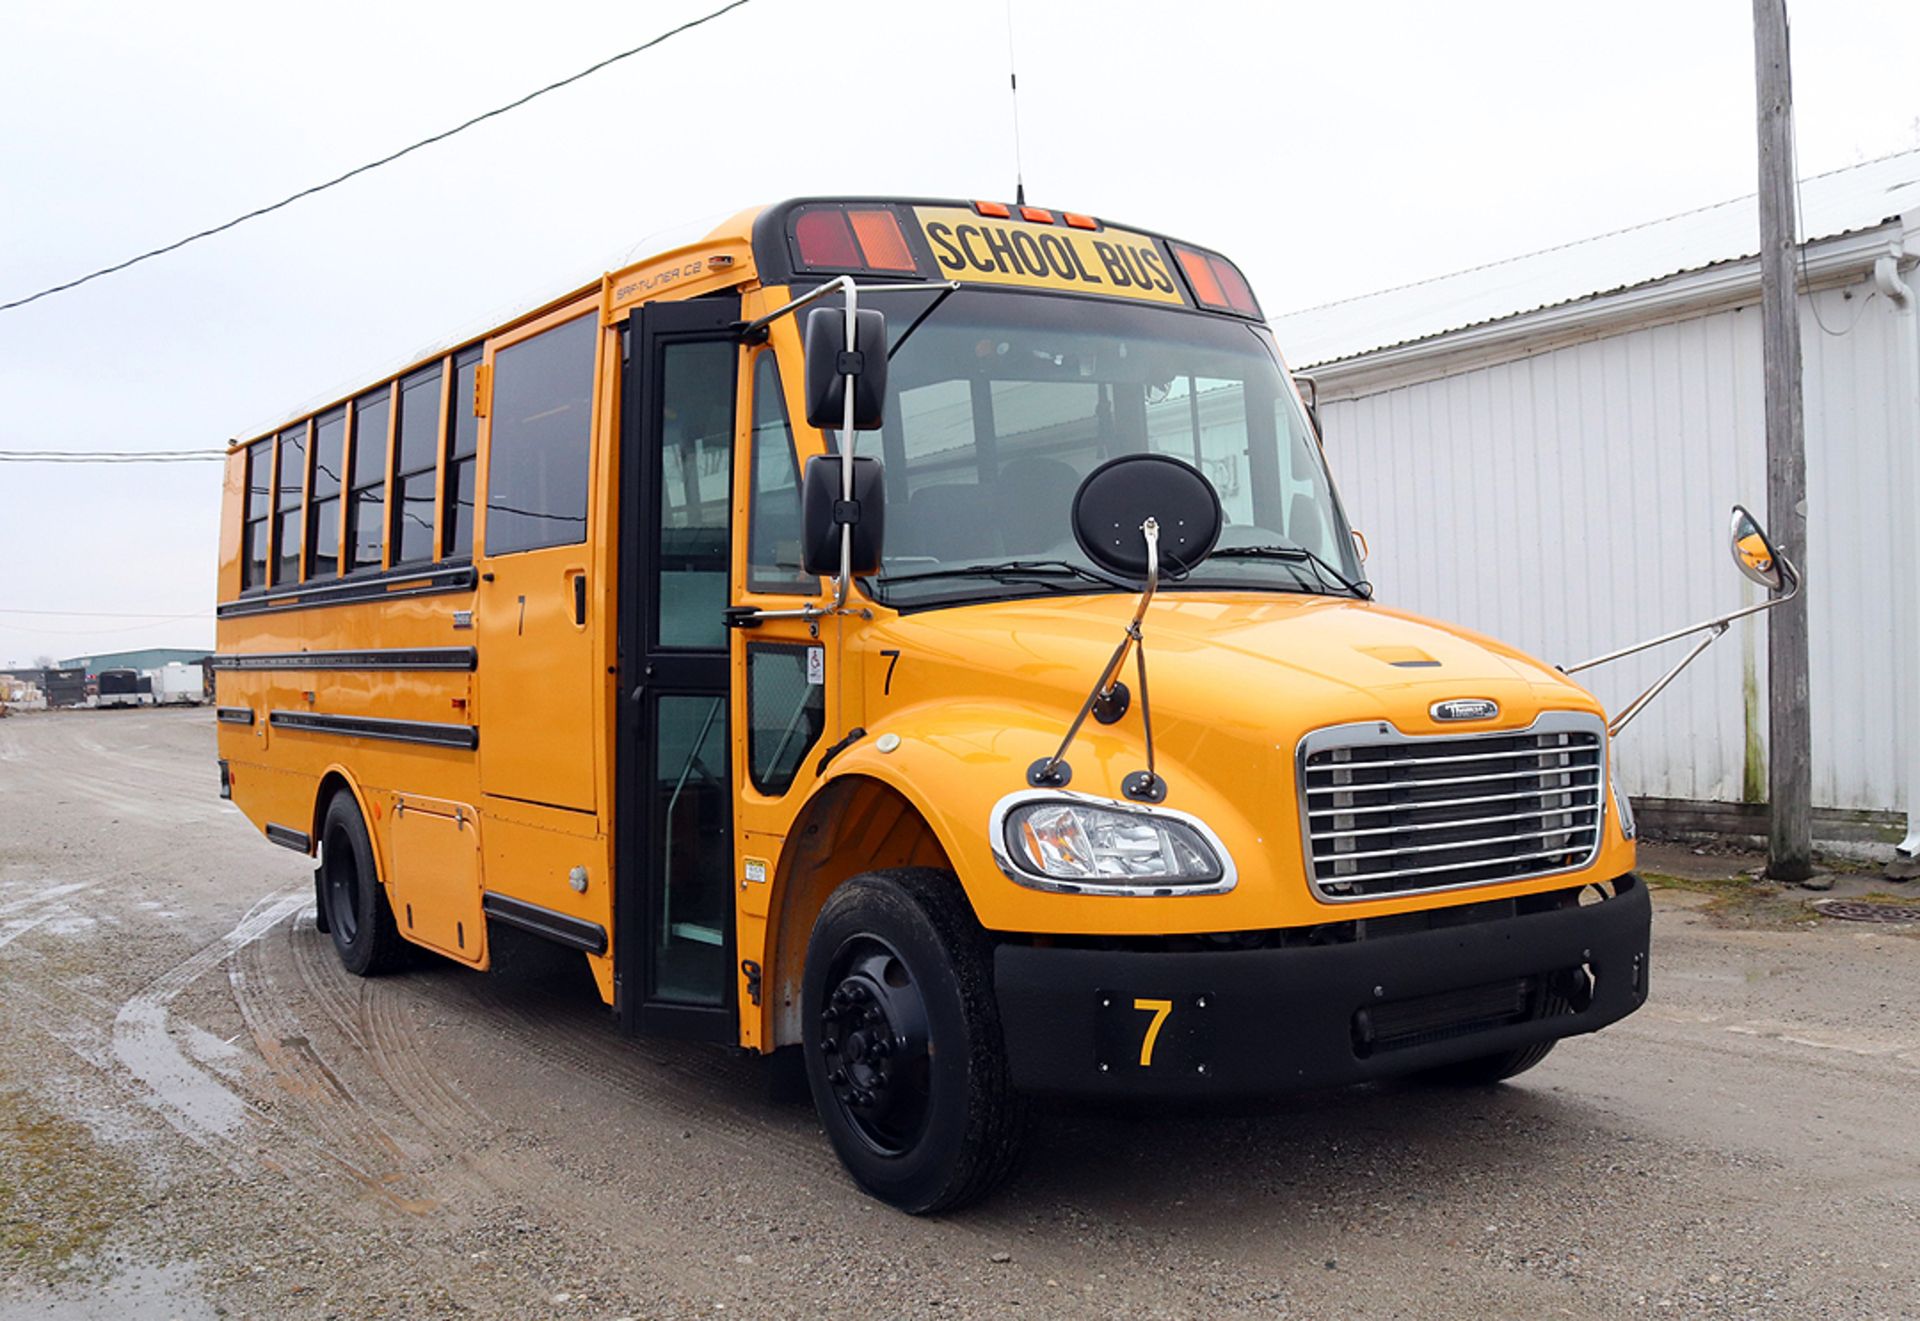 2011 Thomas C2 Saf-T-Liner School Bus on Freightliner Chassis with Braun Handicap Lift, 215,496 mile